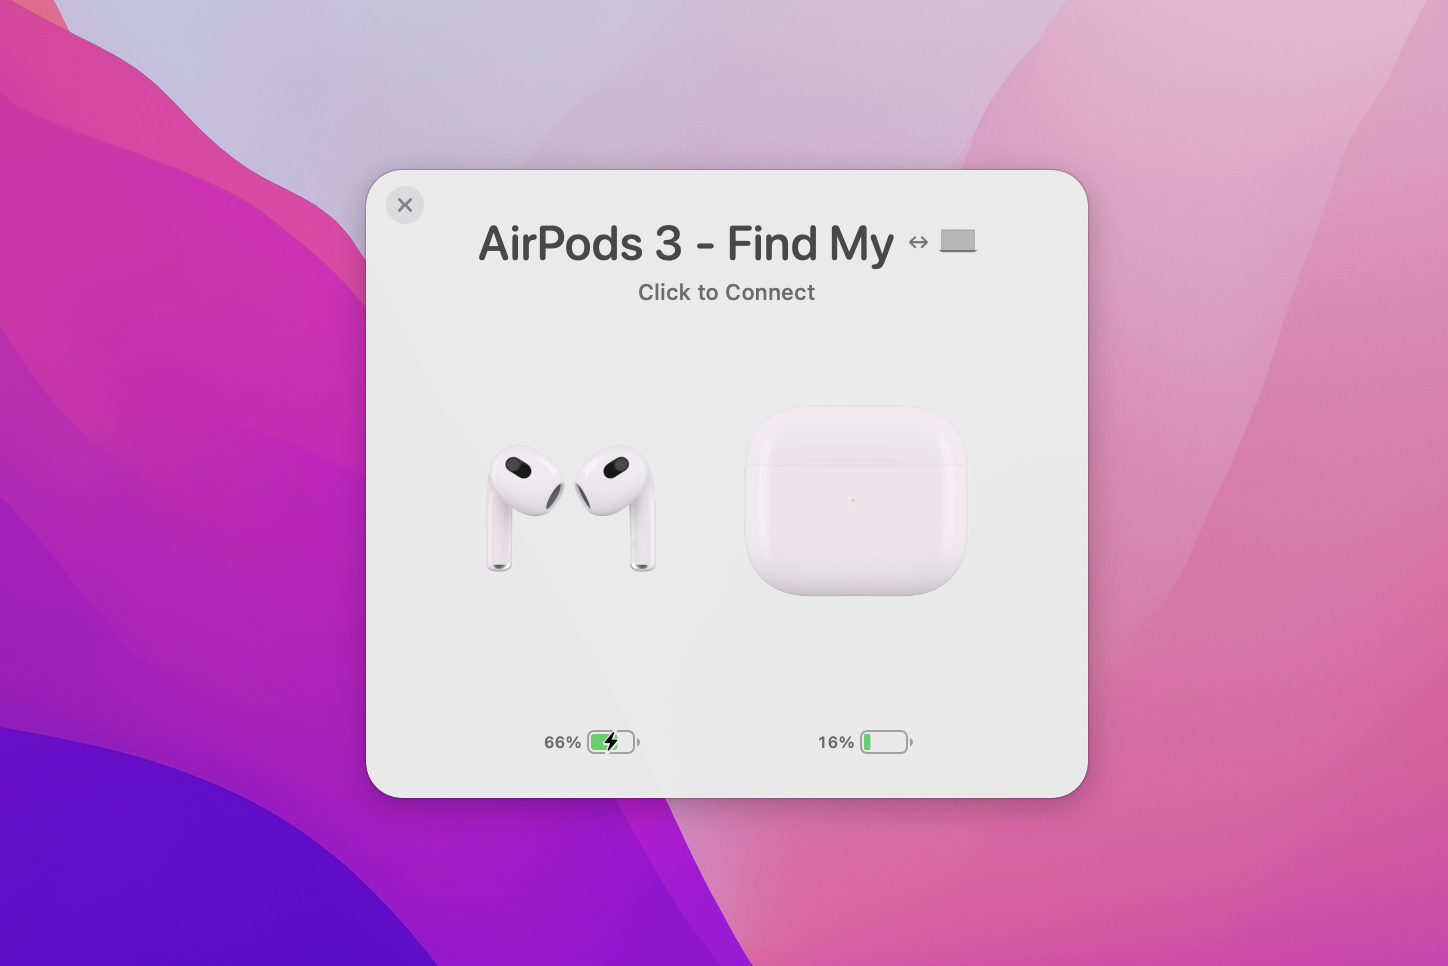 AirPods 3 - Click to Connect